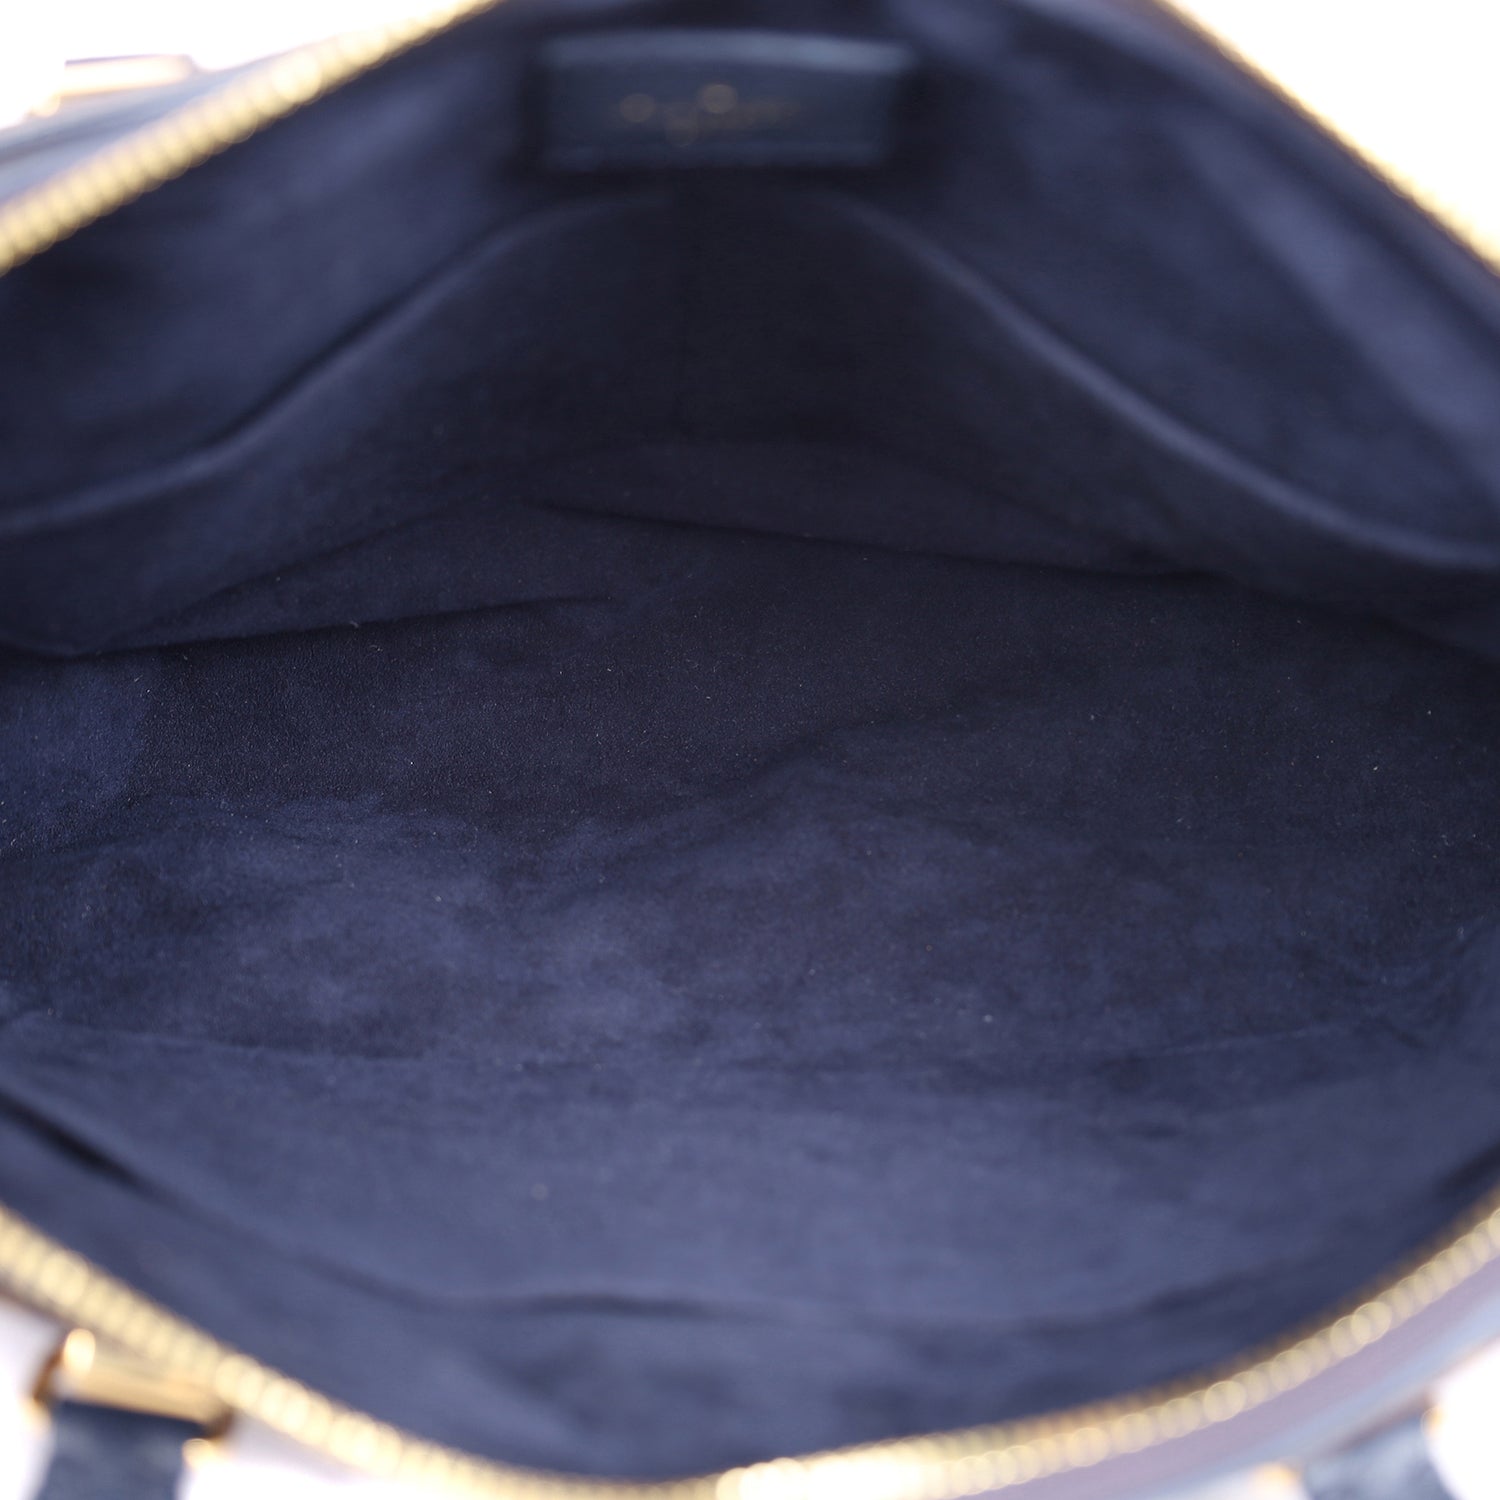 Monogram Pallas Full Dark Blue (Authentic Pre-Owned) – The Lady Bag